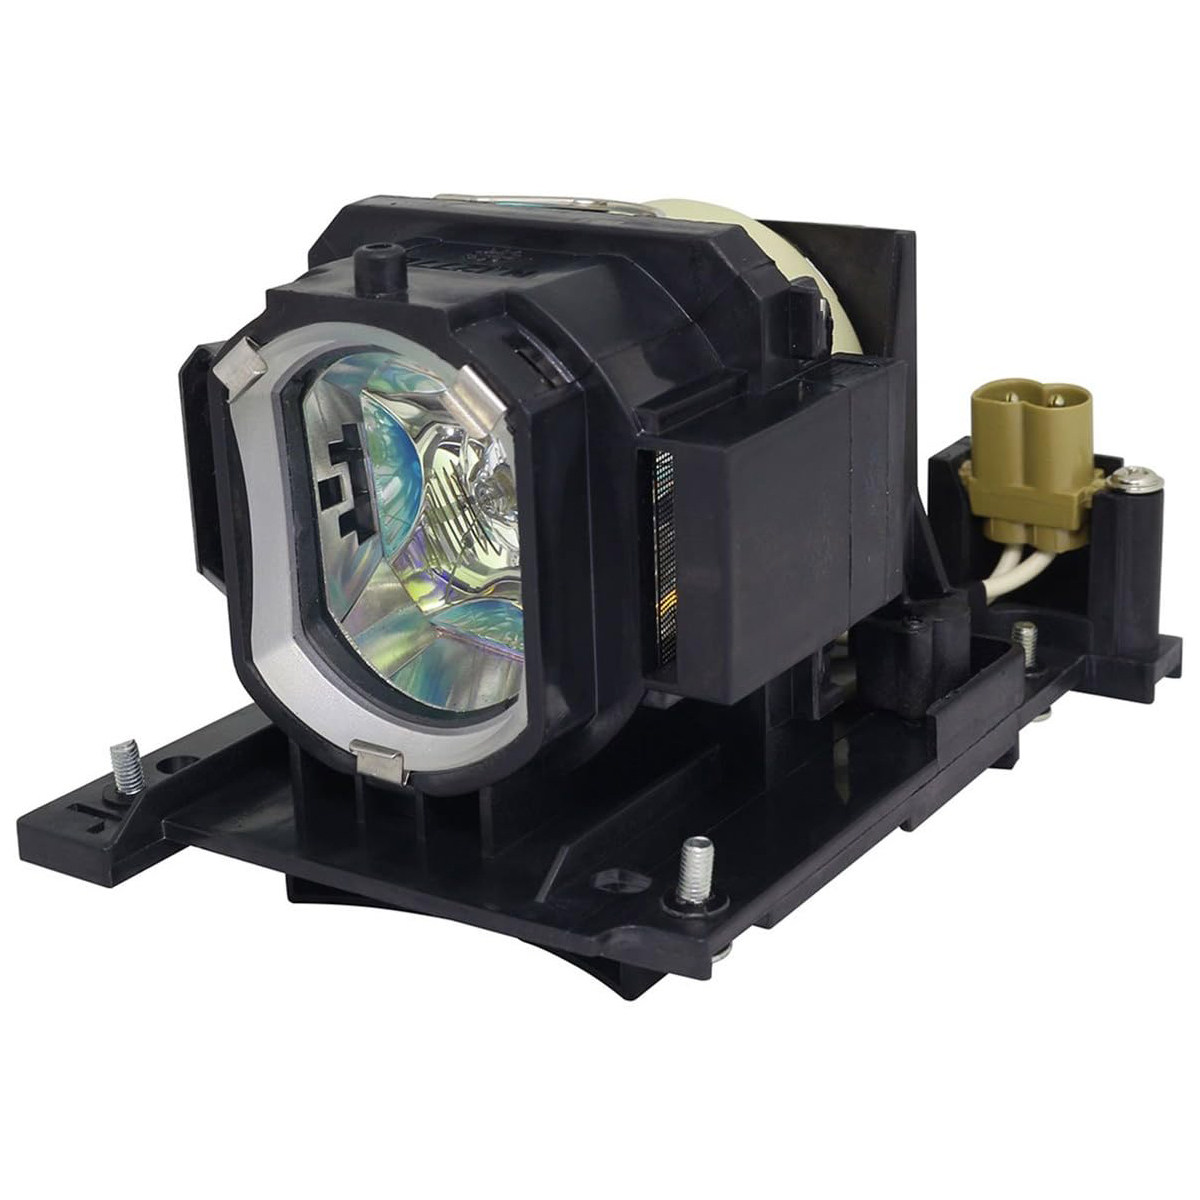 Replacement Projector lamp SP-LAMP-064 For Infocus IN5122 IN5124